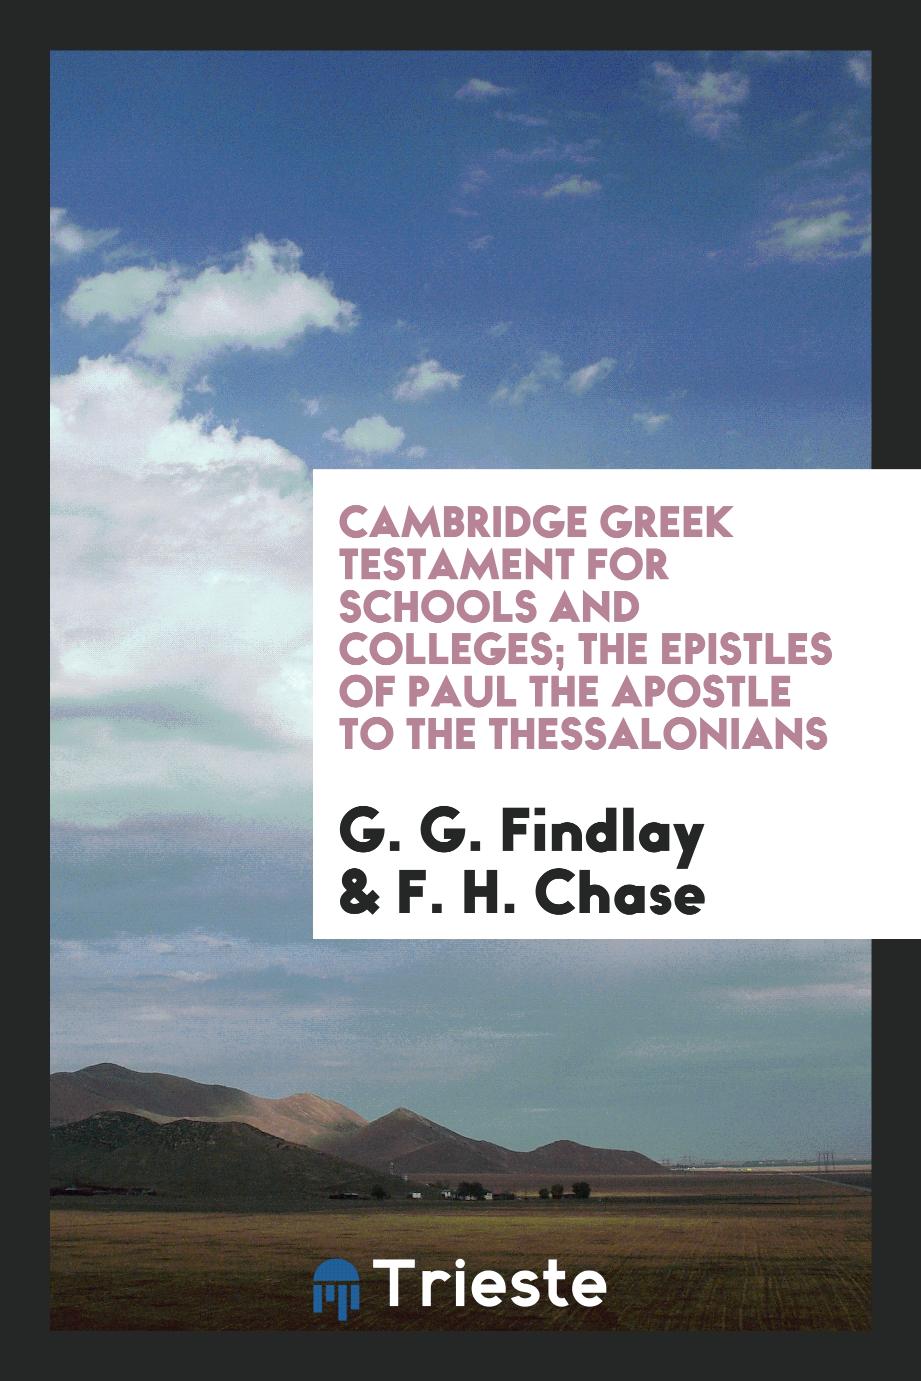 G. G. Findlay, F. H. Chase - Cambridge Greek Testament for Schools and Colleges; The Epistles of Paul the Apostle to the Thessalonians